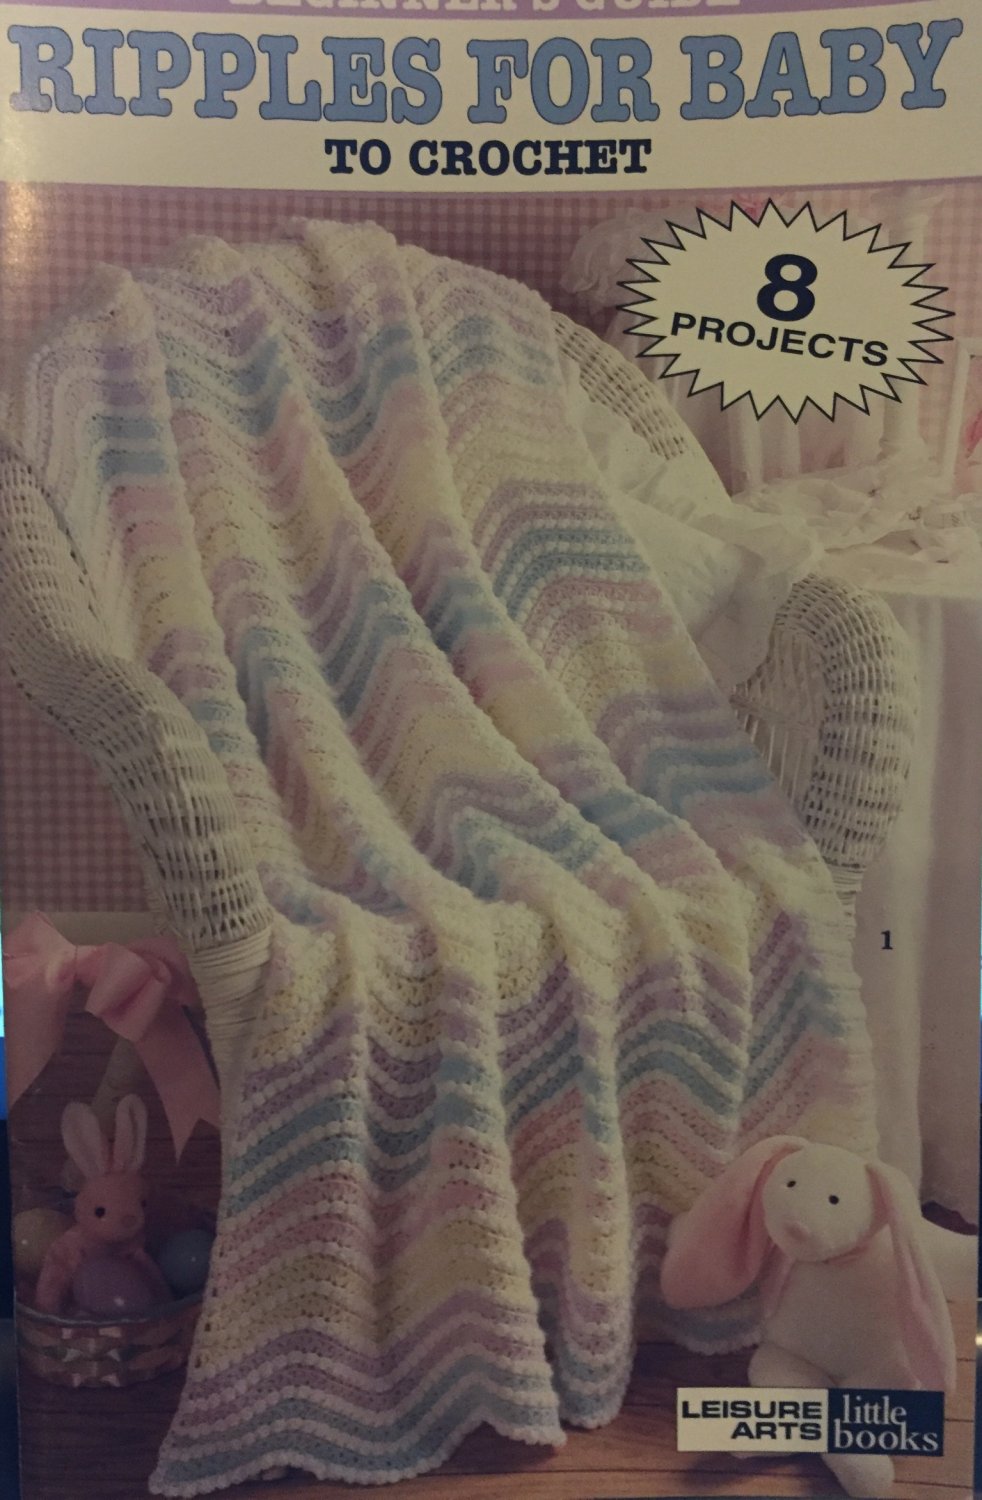 Ripples For Baby To Crochet 8 Projects Leisure Arts Little Books Beginner's Guide